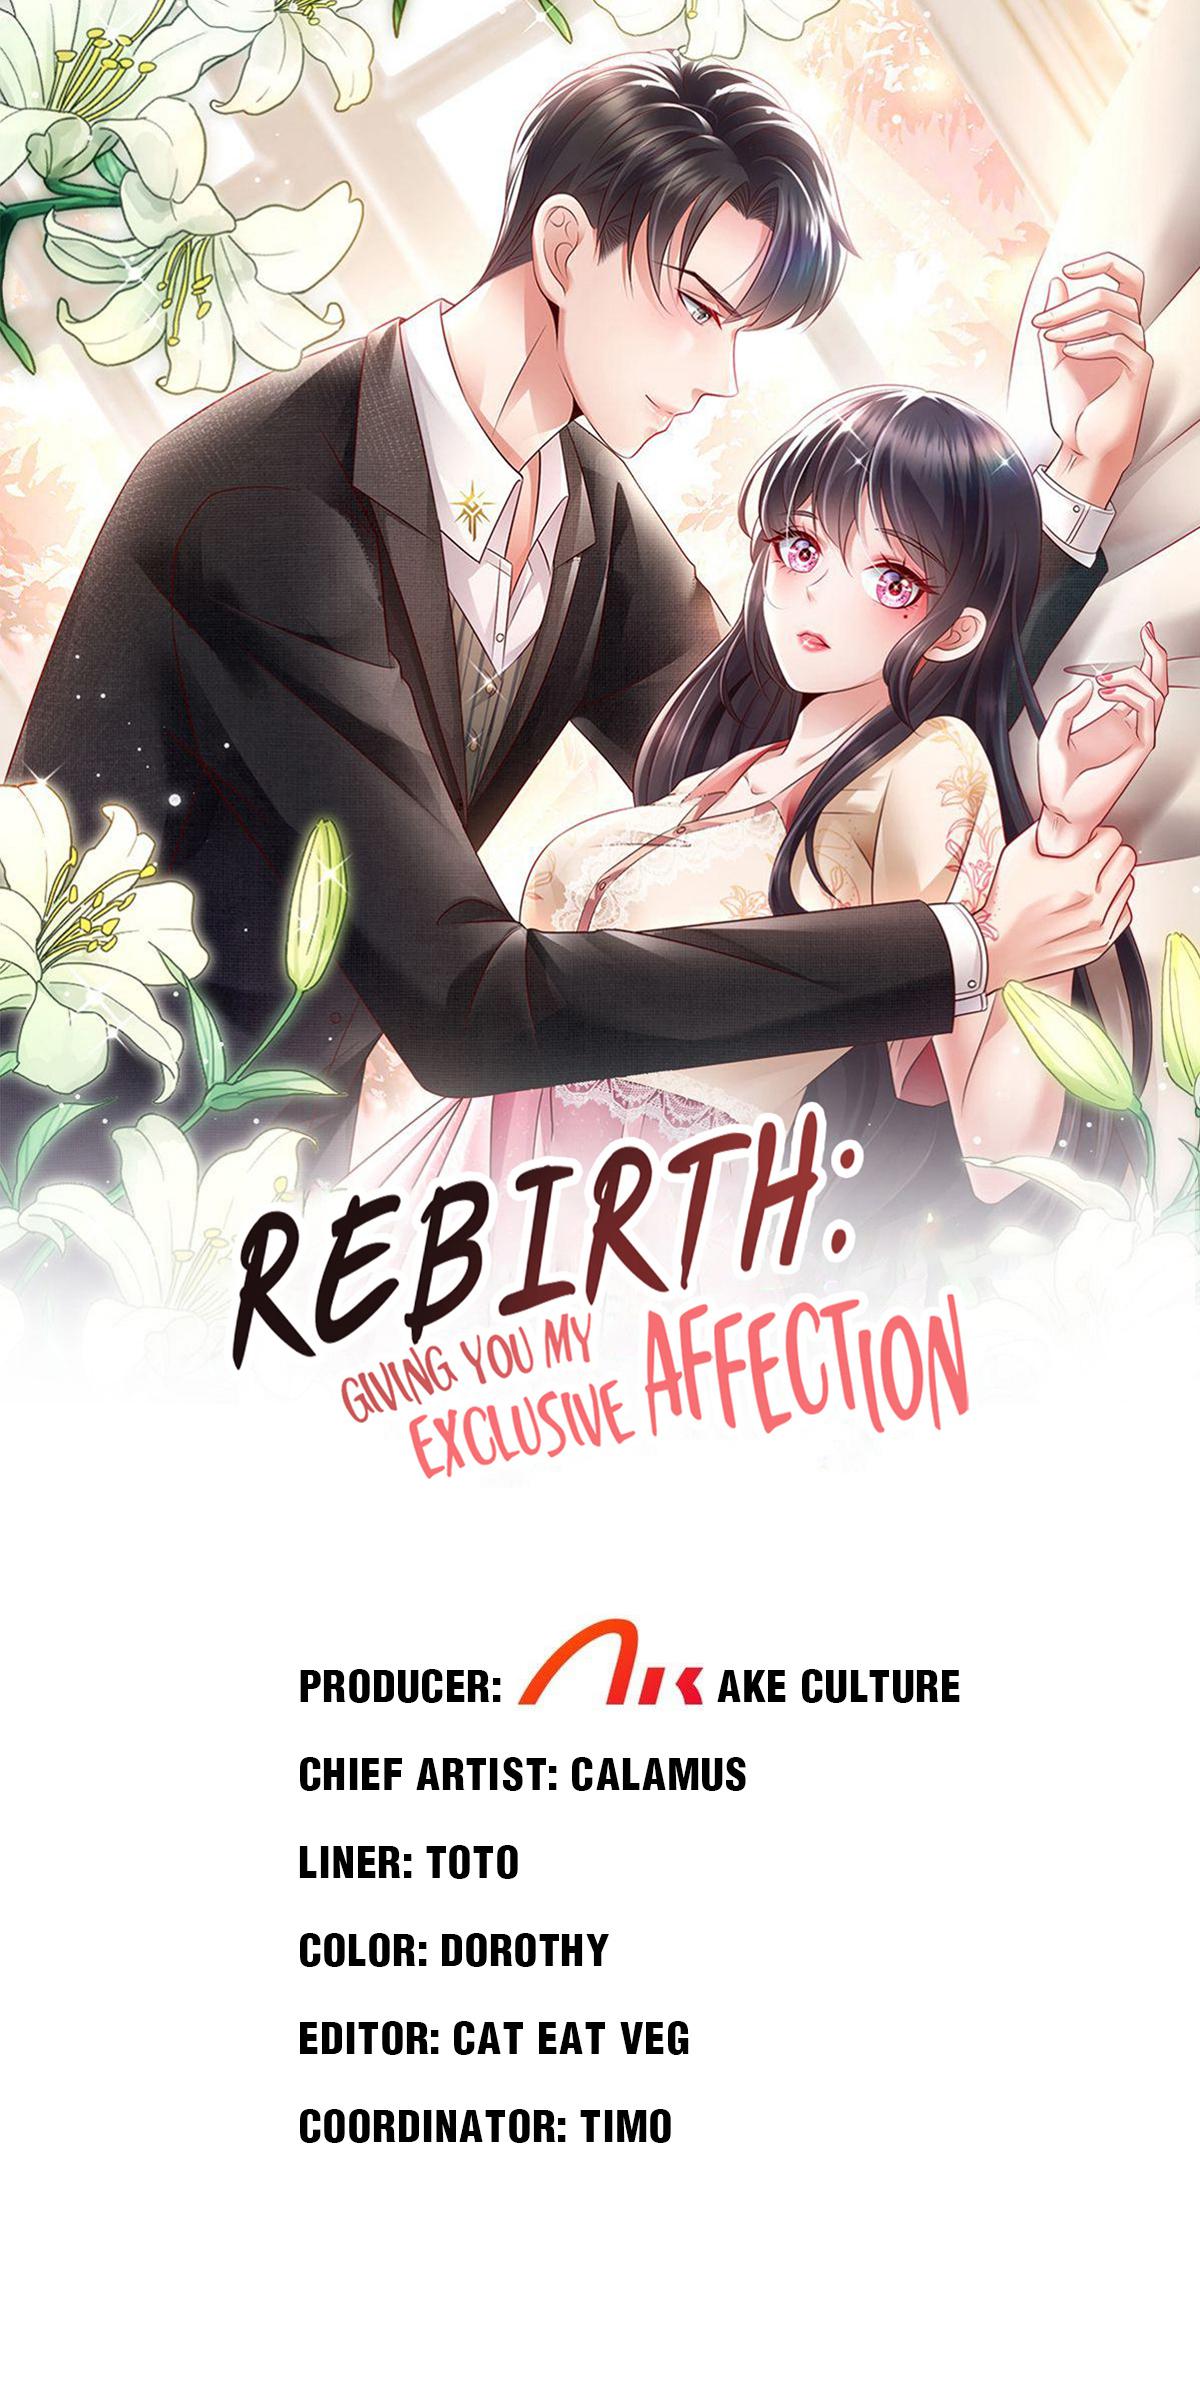 Rebirth: Giving You My Exclusive Affection 216